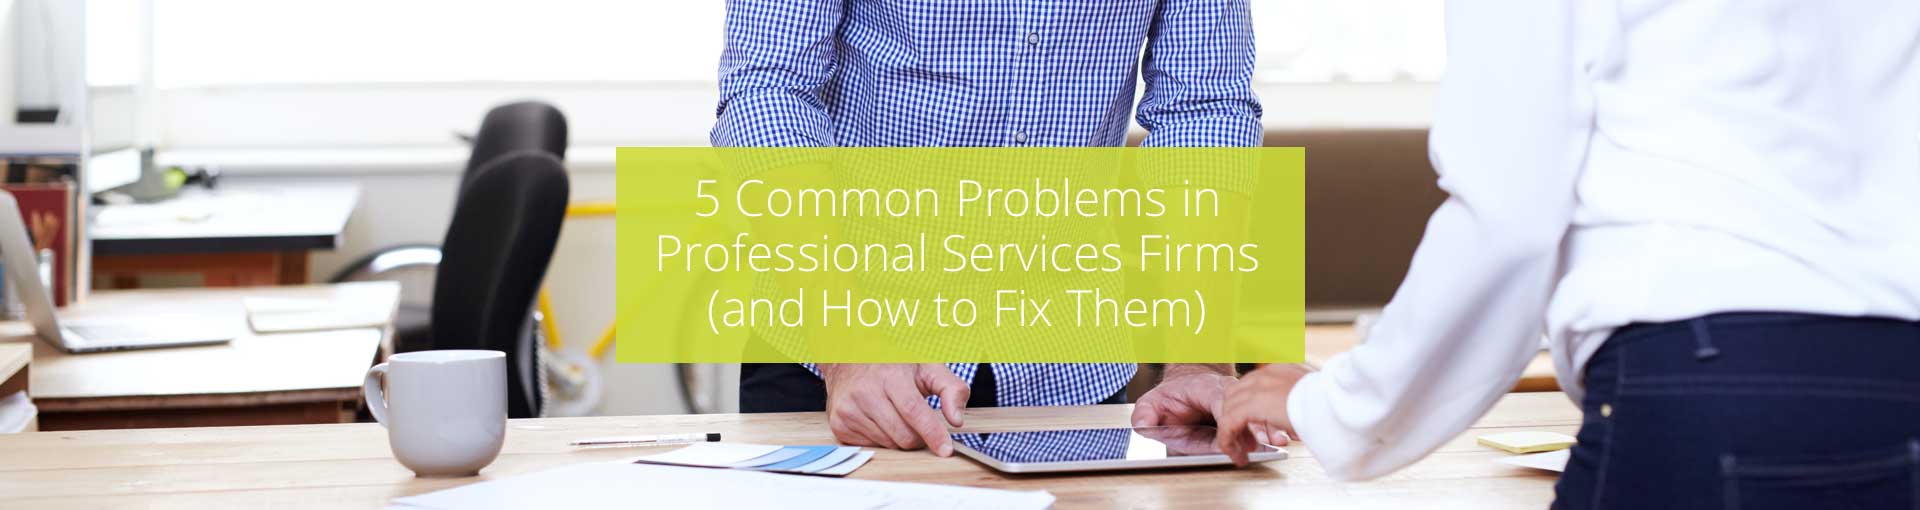 5 Common Problems in Professional Services Firms (and How to Fix Them) Featured Image